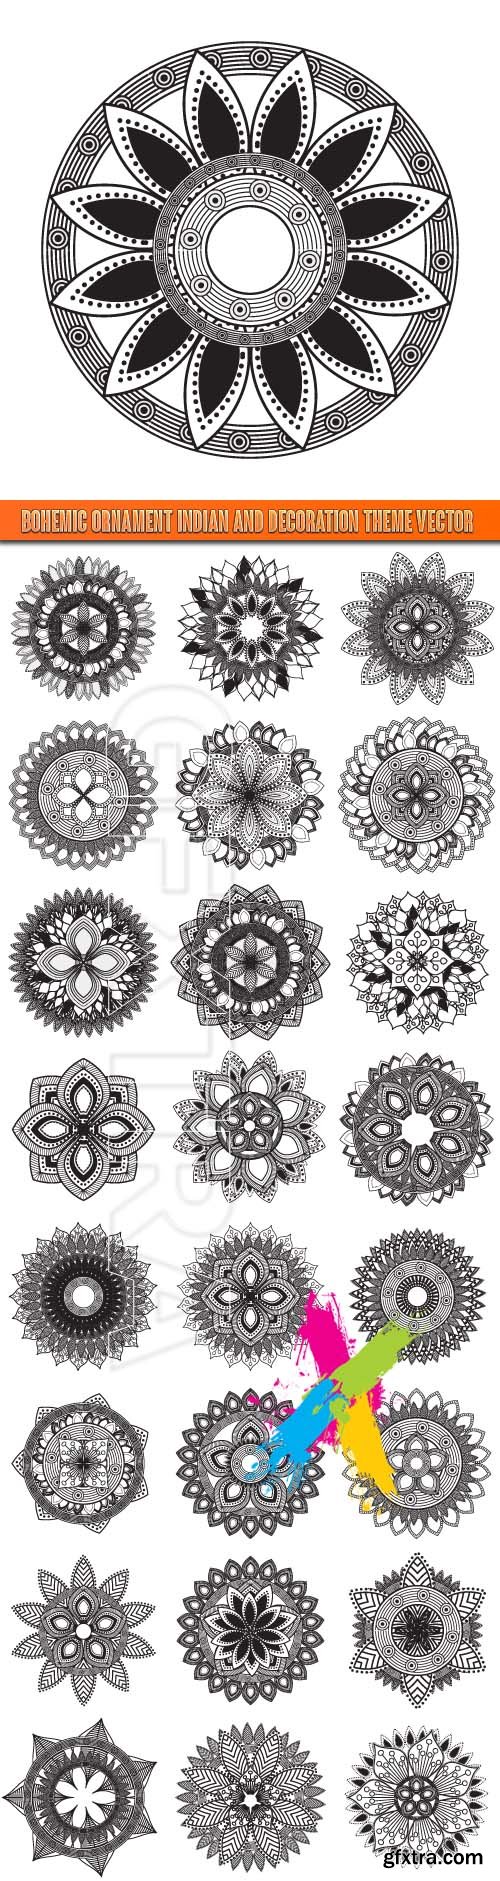 Bohemic ornament indian and decoration theme vector